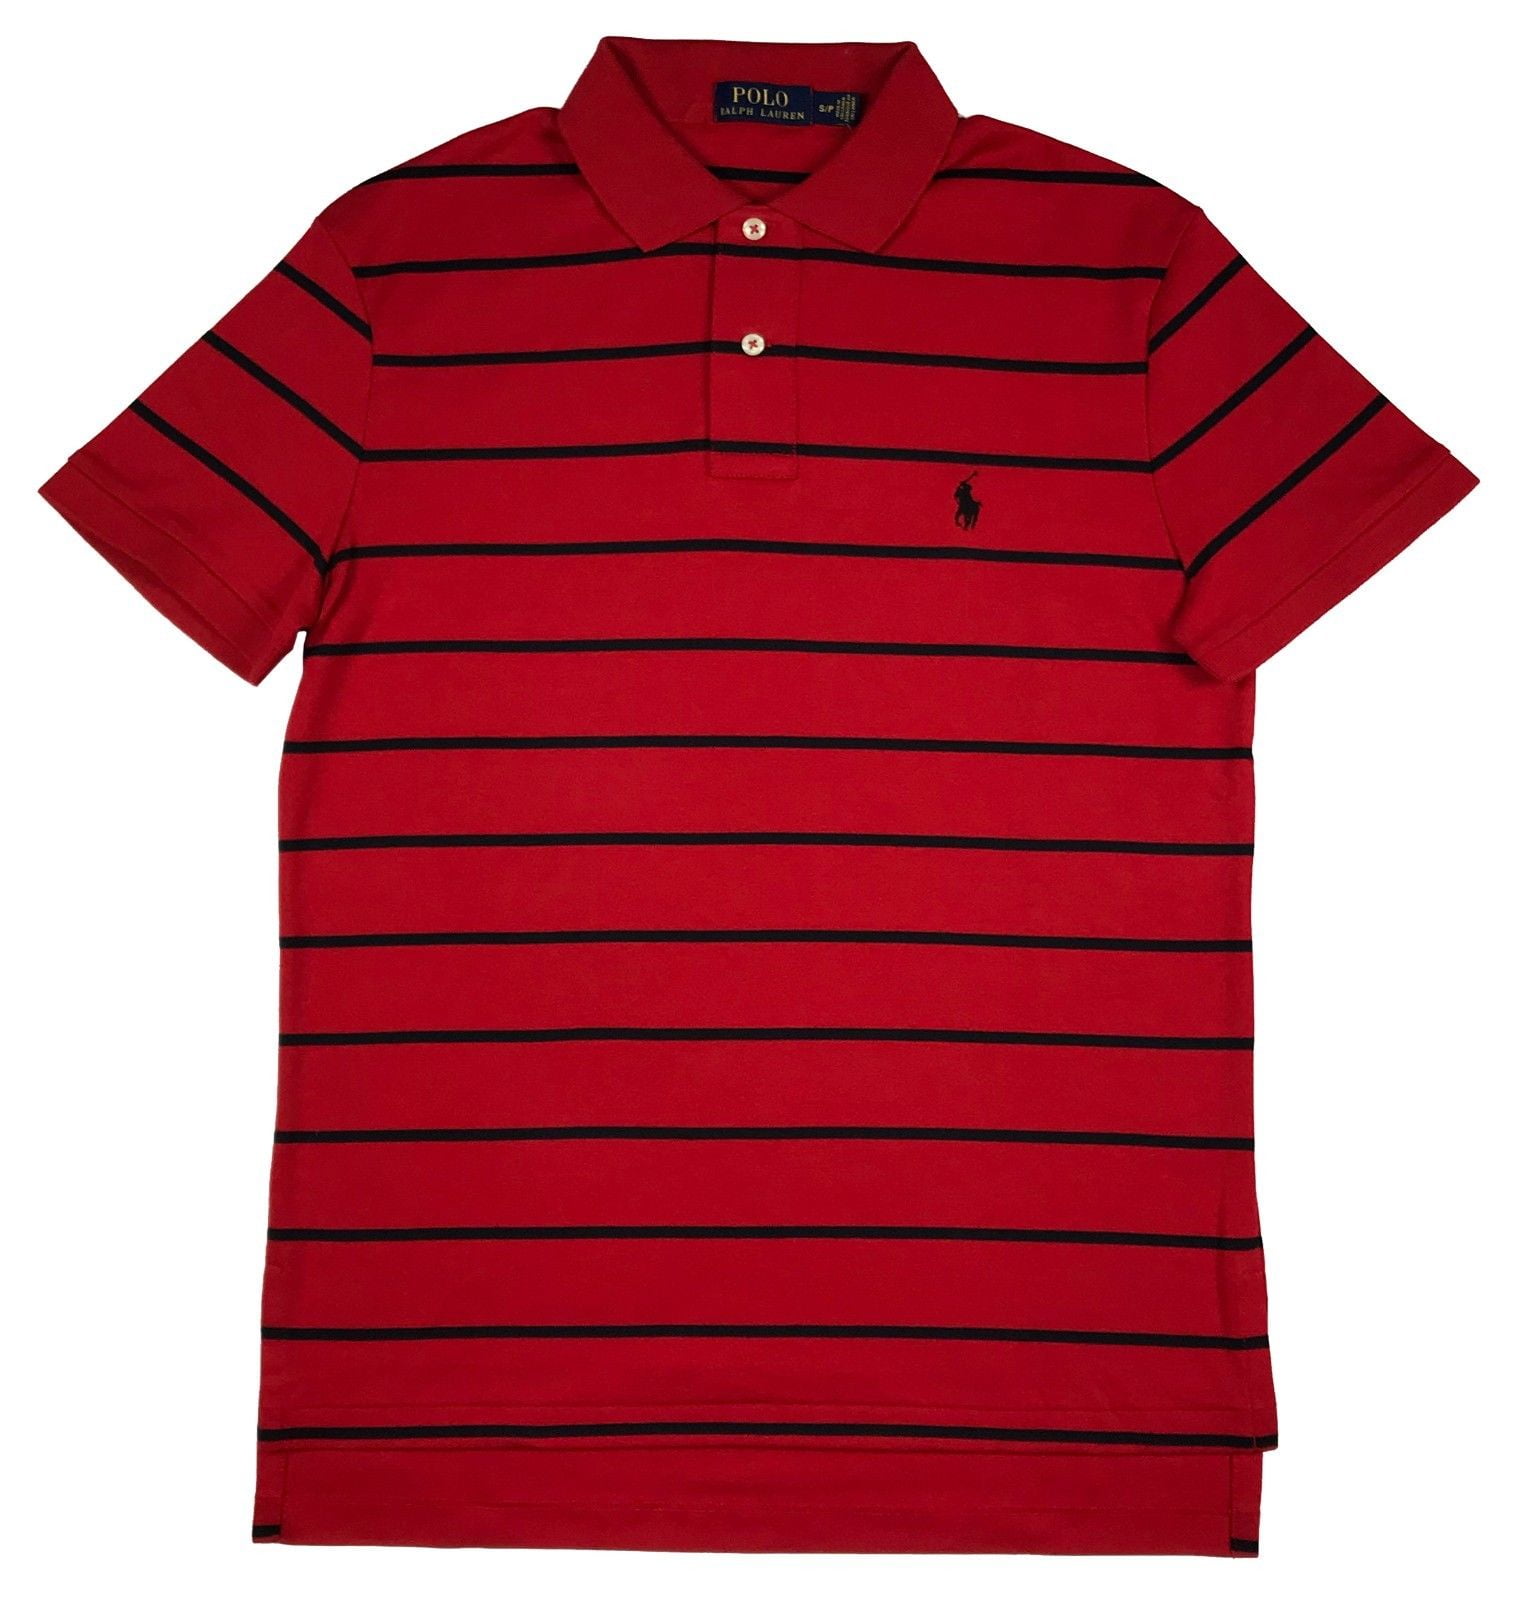 Buy red and black ralph lauren polo shirt - OFF 72%